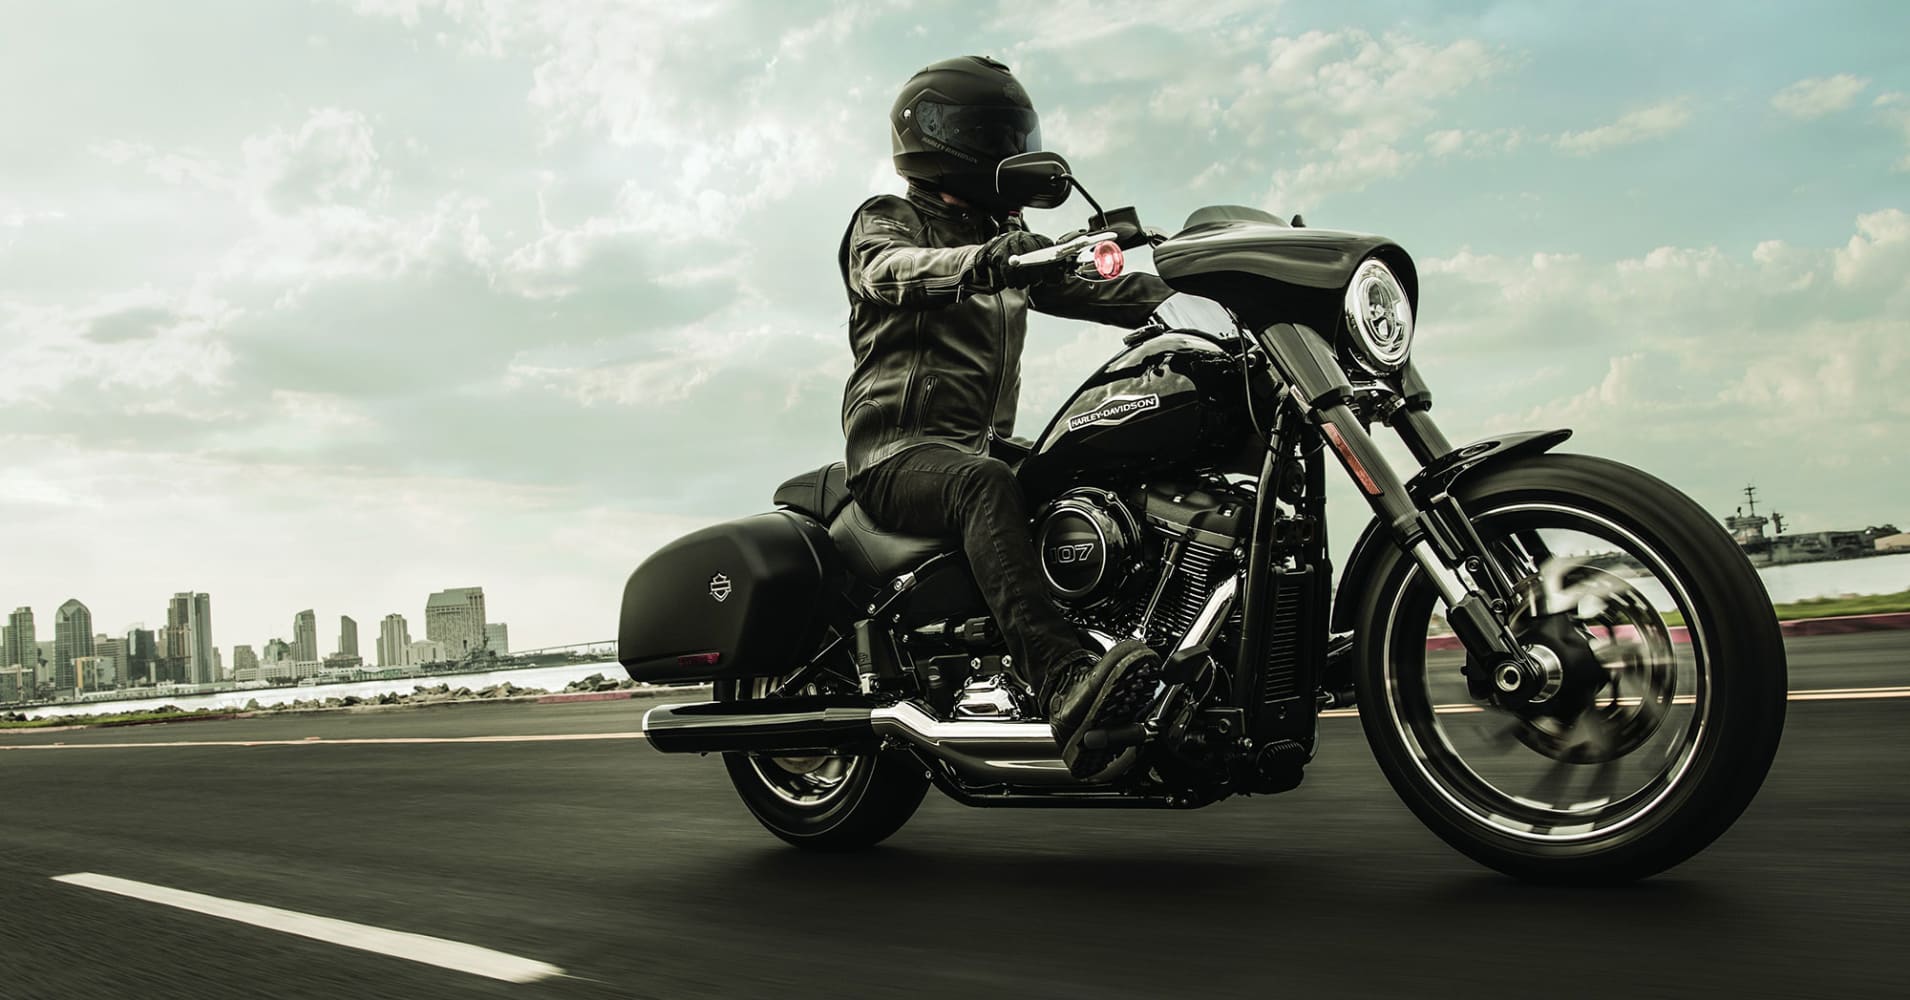  Harley  Davidson  tries to regain its coolness factor